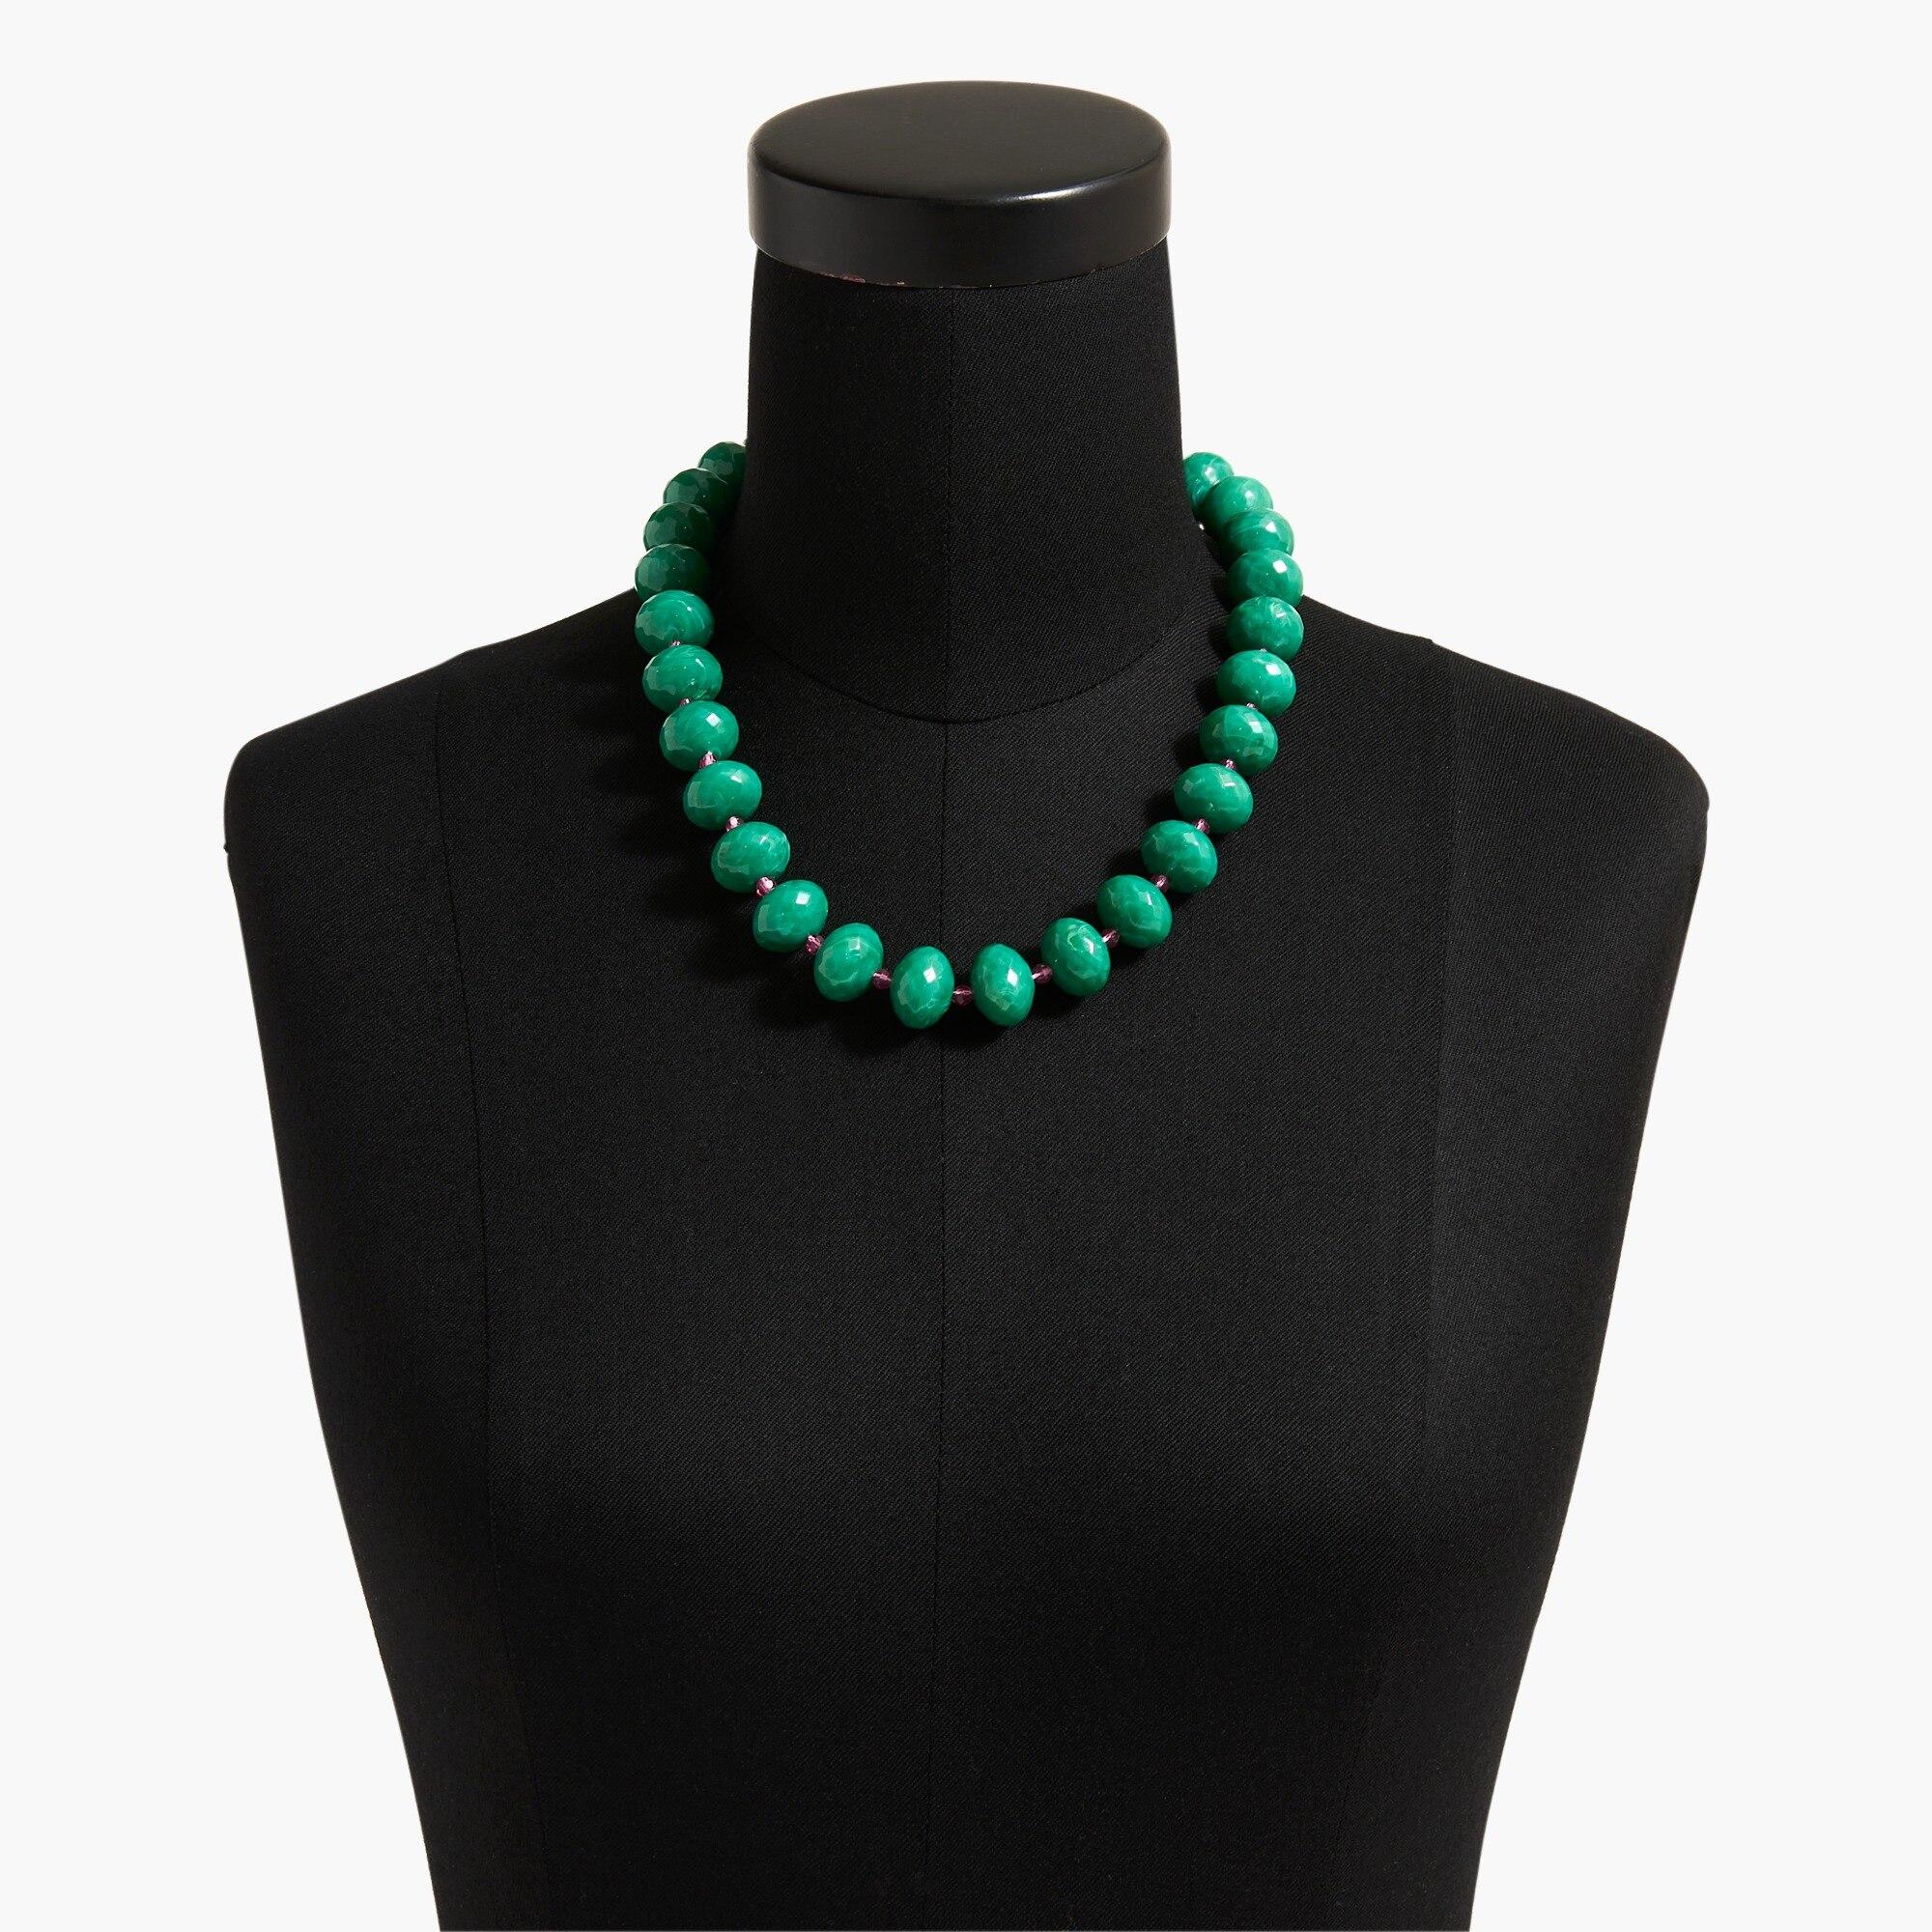 Big Chain Necklace Soft Green Mat – BOW19 Details - B2C